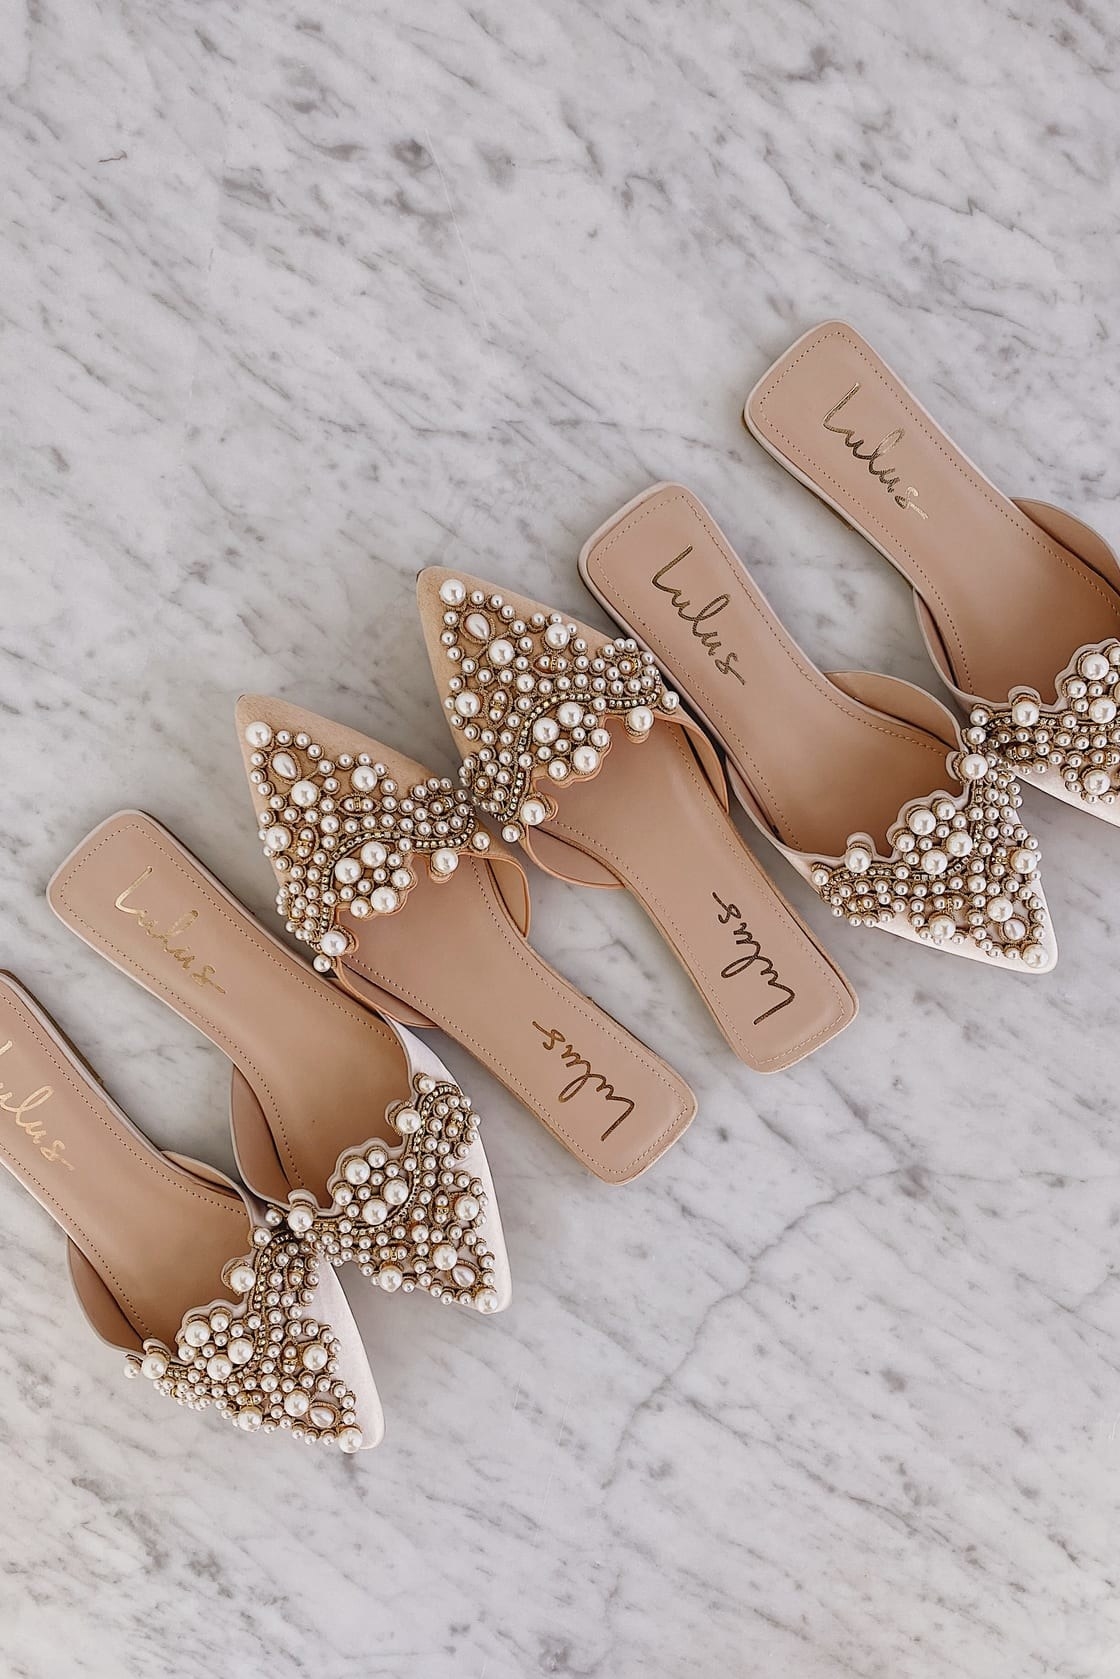 A pair of white and beige shoes with pearls all over them